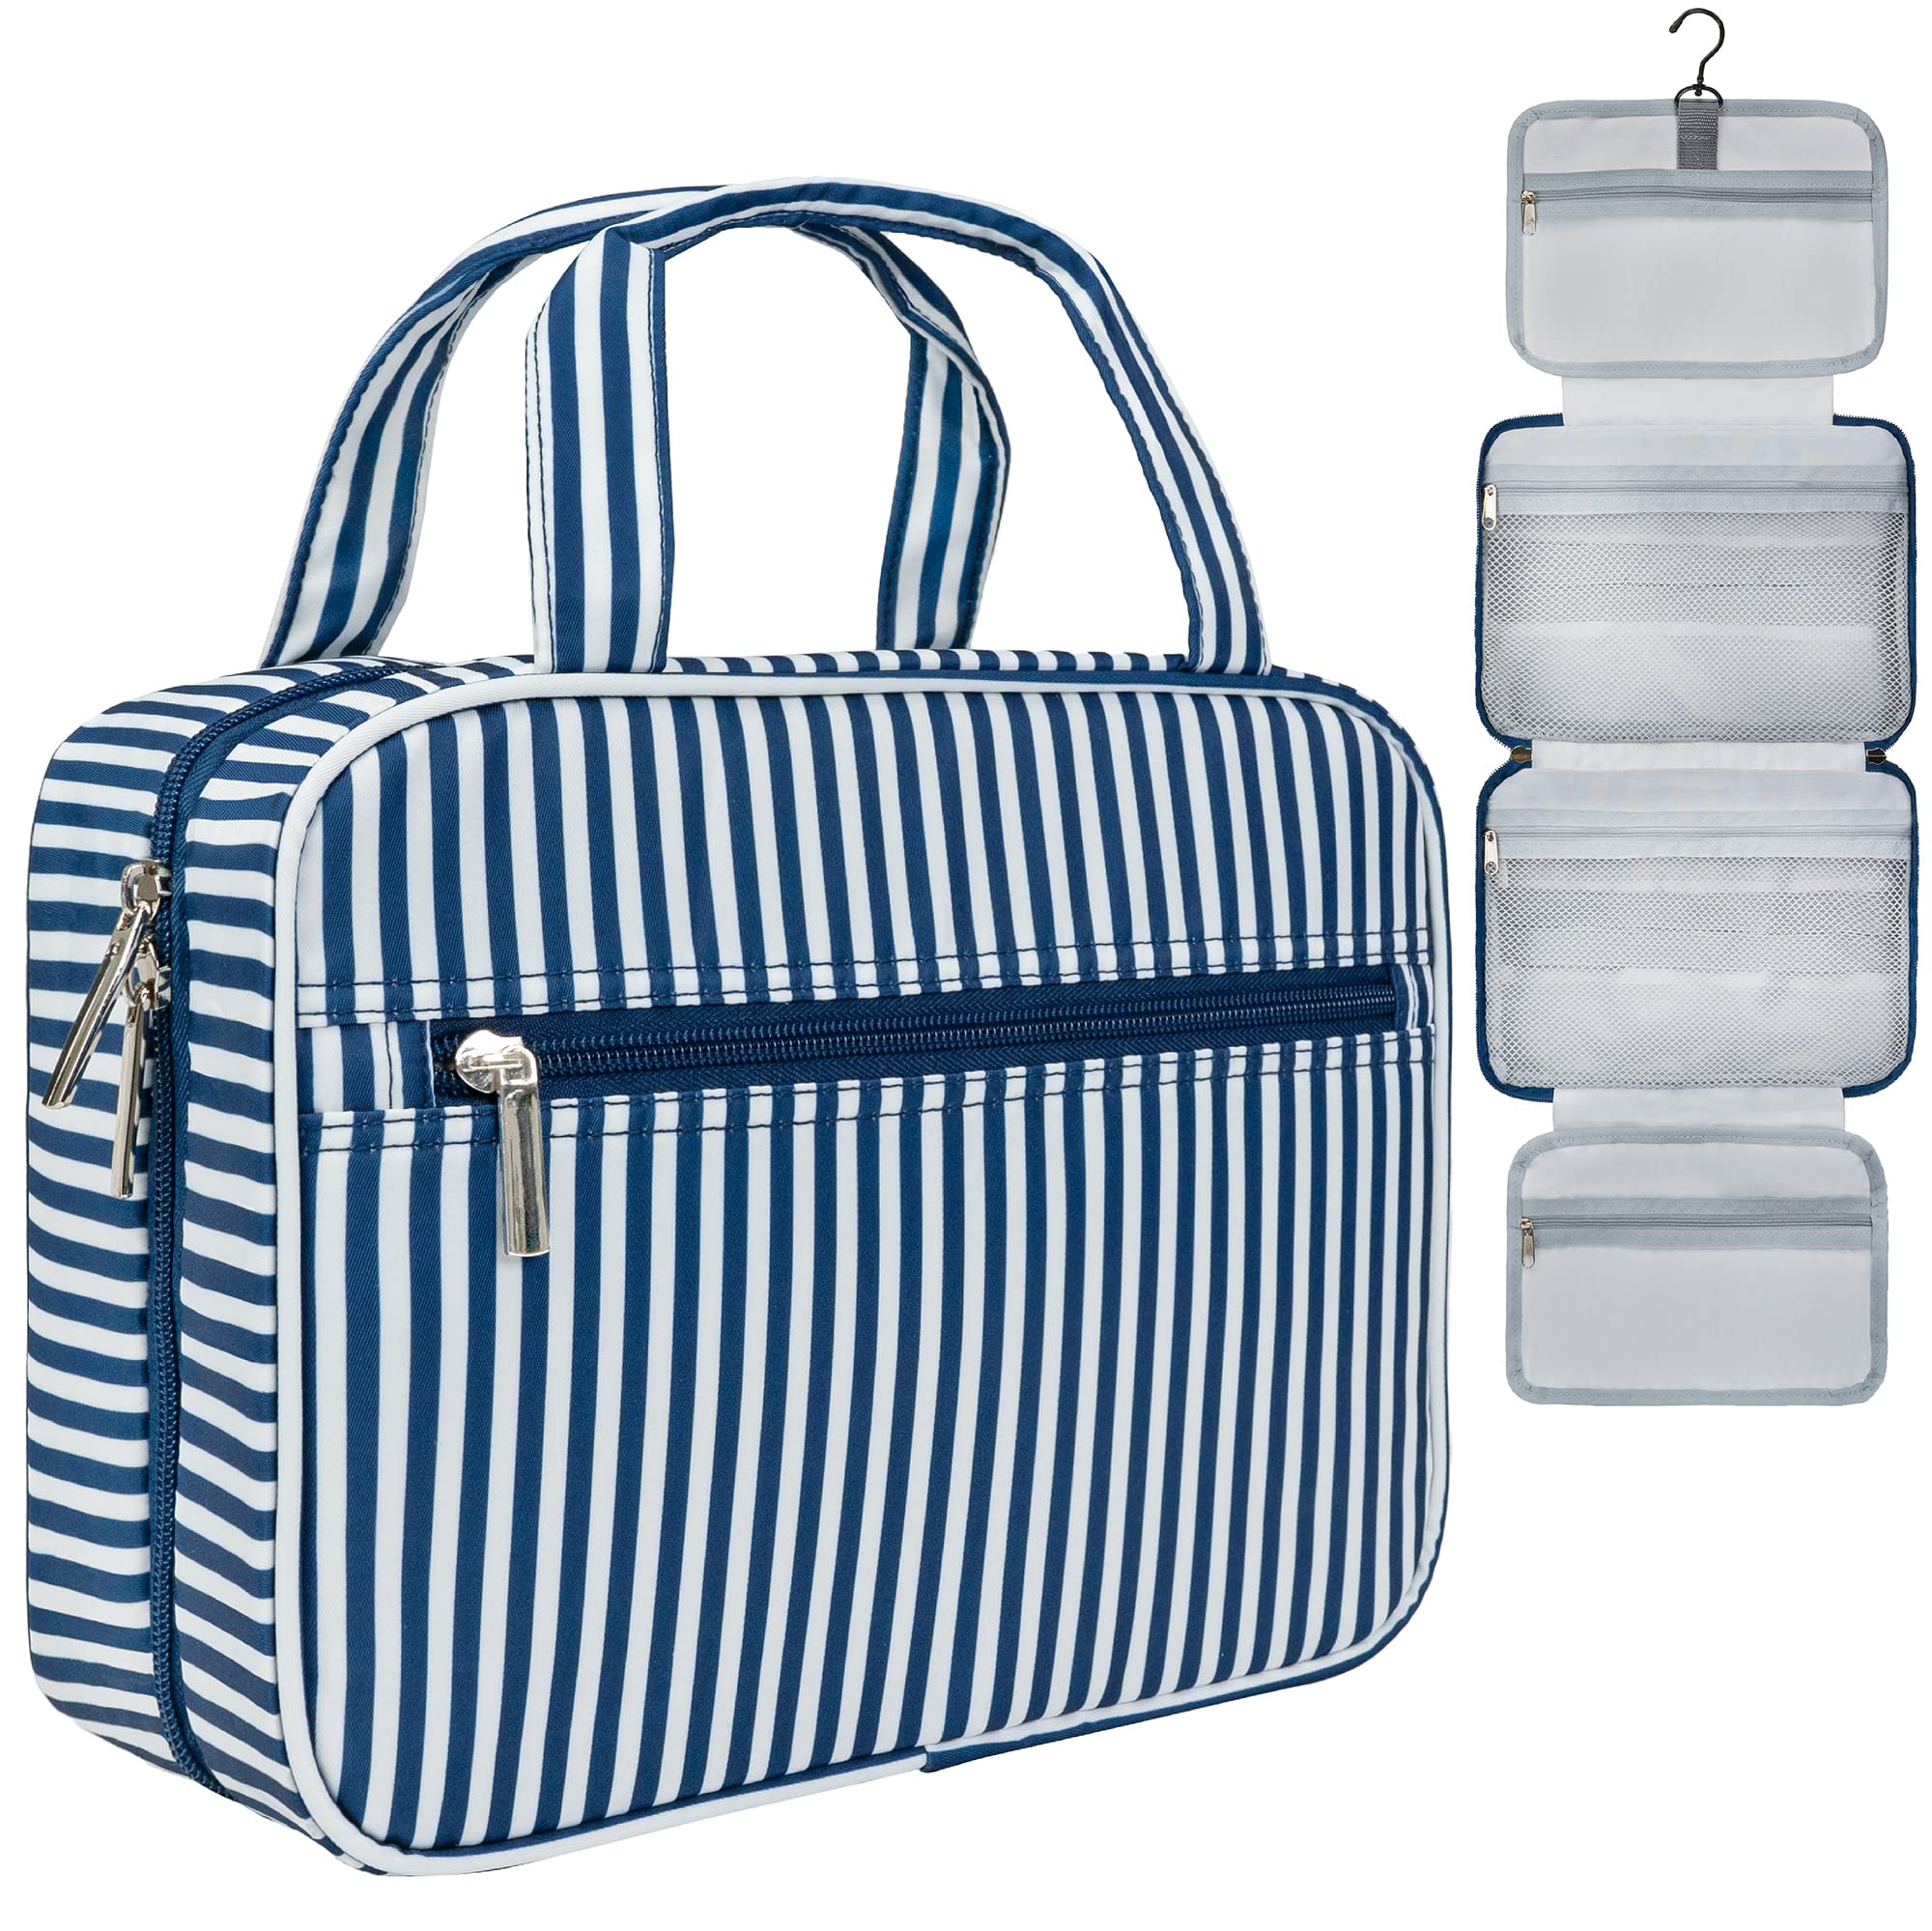 Hanging Roll-Up Makeup Bag / Toiletry Kit / Travel Organizer for